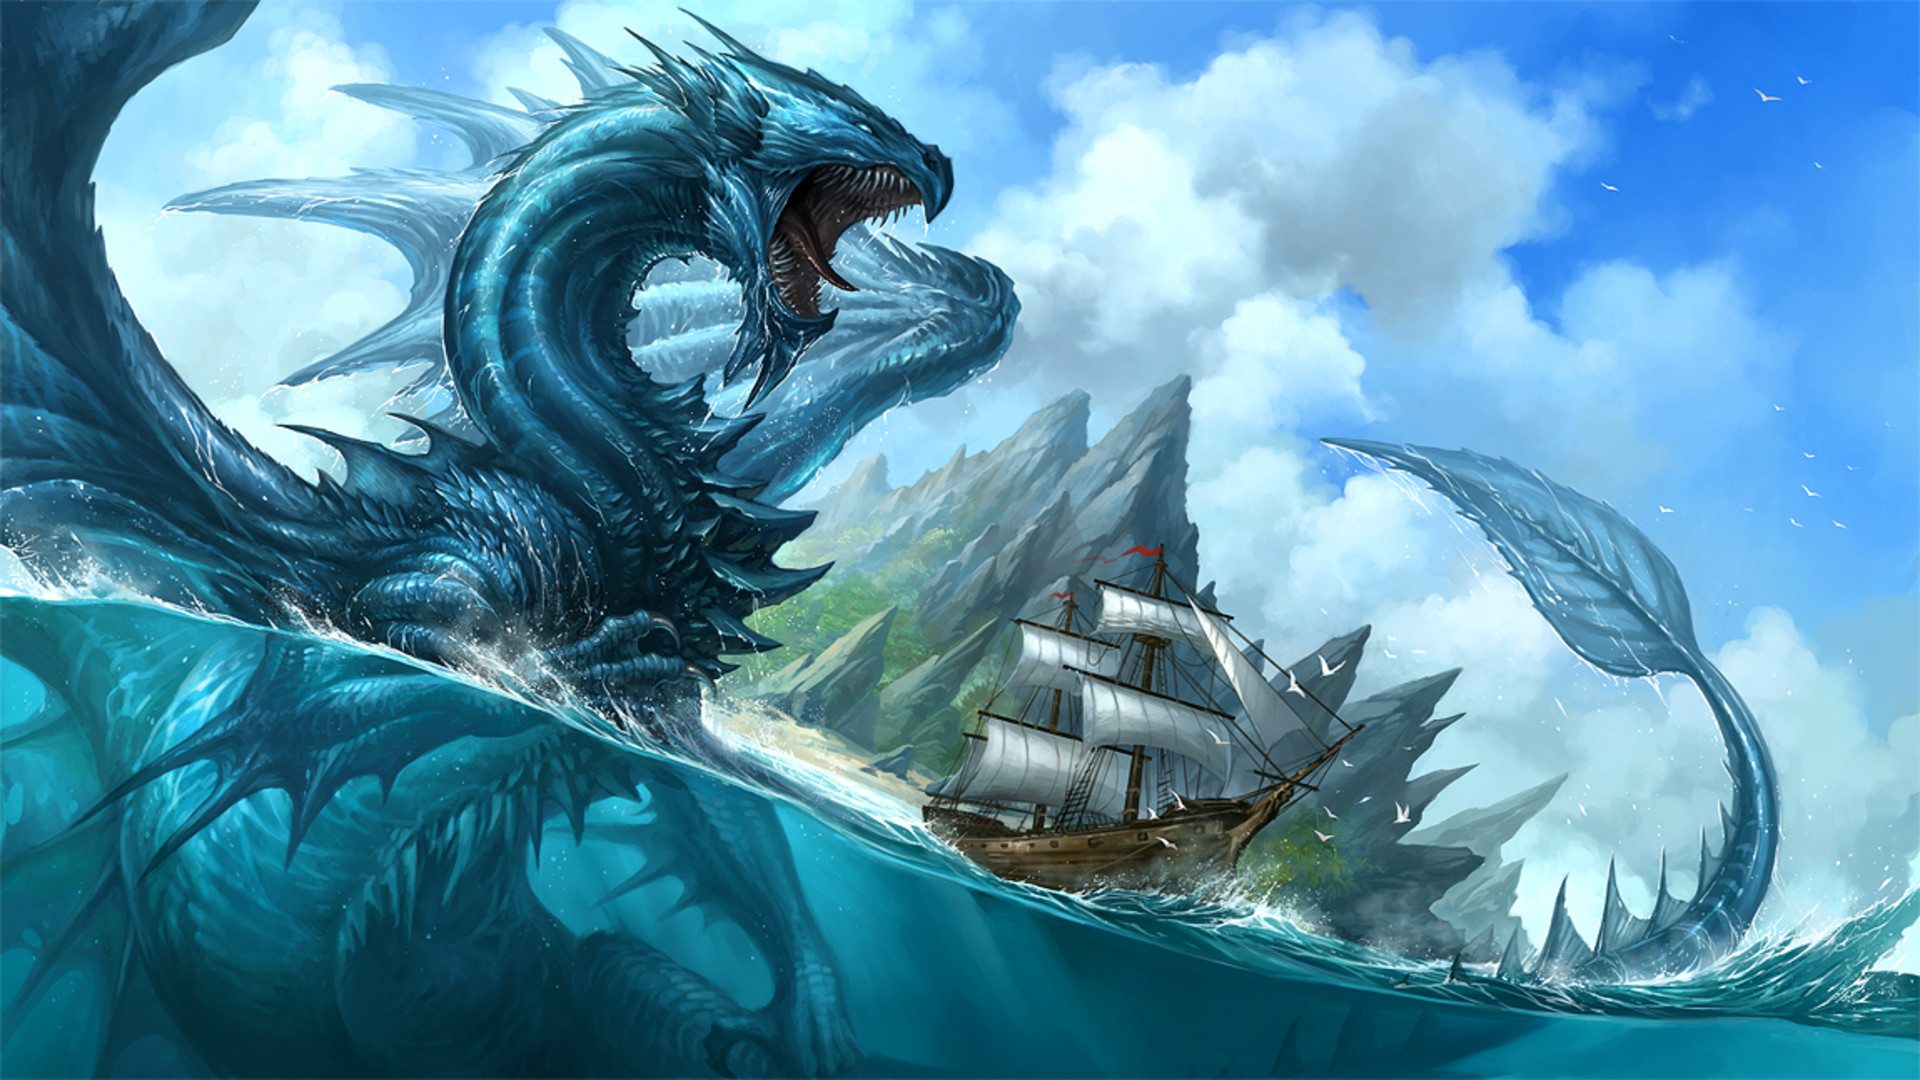 1920x1080 Dragons, Water Dragon, The monster in the ocean.